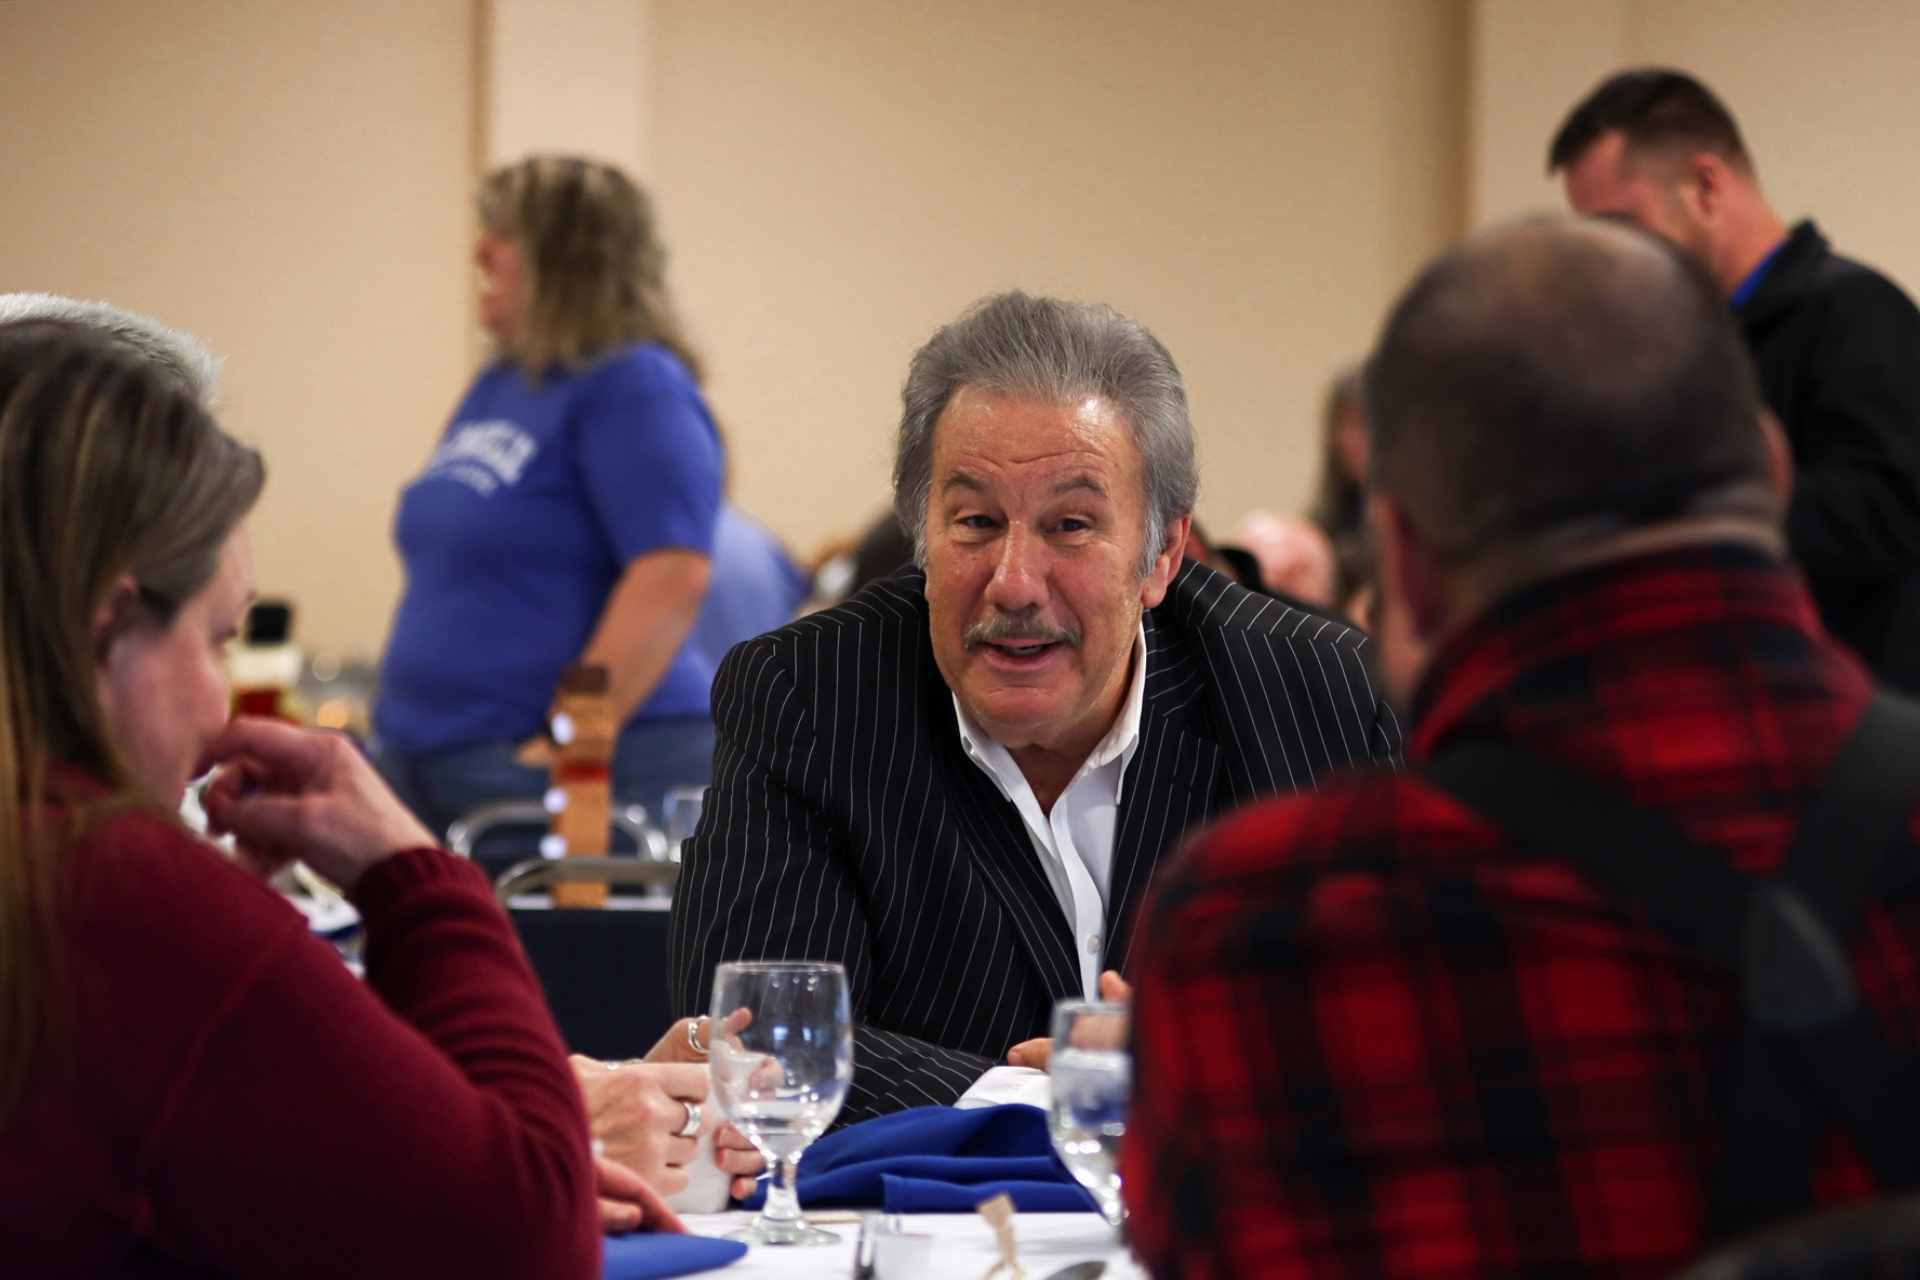 Glenville State College President Dr. Mark Manchin (center) chats with Associate Professor of English Dr. Melody Wise and Assistant Professor of Criminal Justice Dr. Jeff Bryson at the Holiday Luncheon.